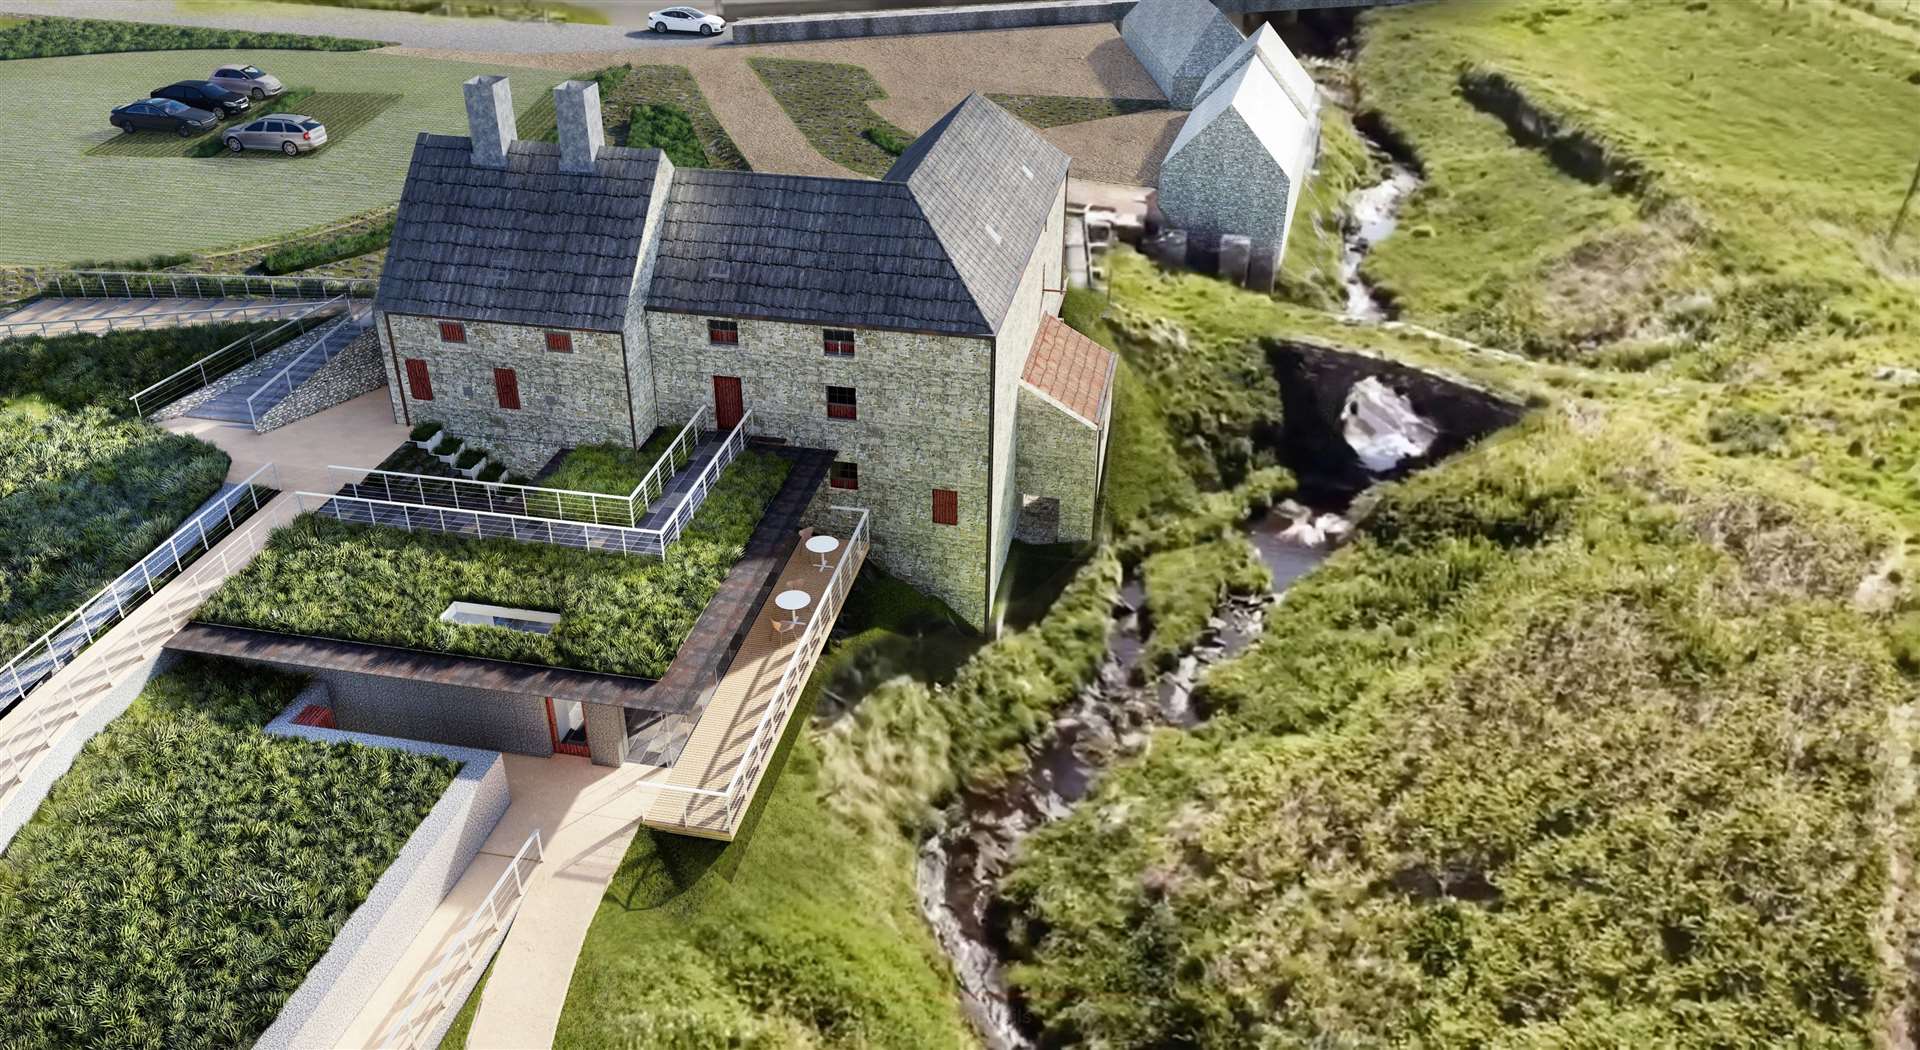 John O’Groats Mill Trust is seeking to bring the mill back into use as a heritage visitor attraction and community venue. Image: Enes Pilavci for McGregor Bowes